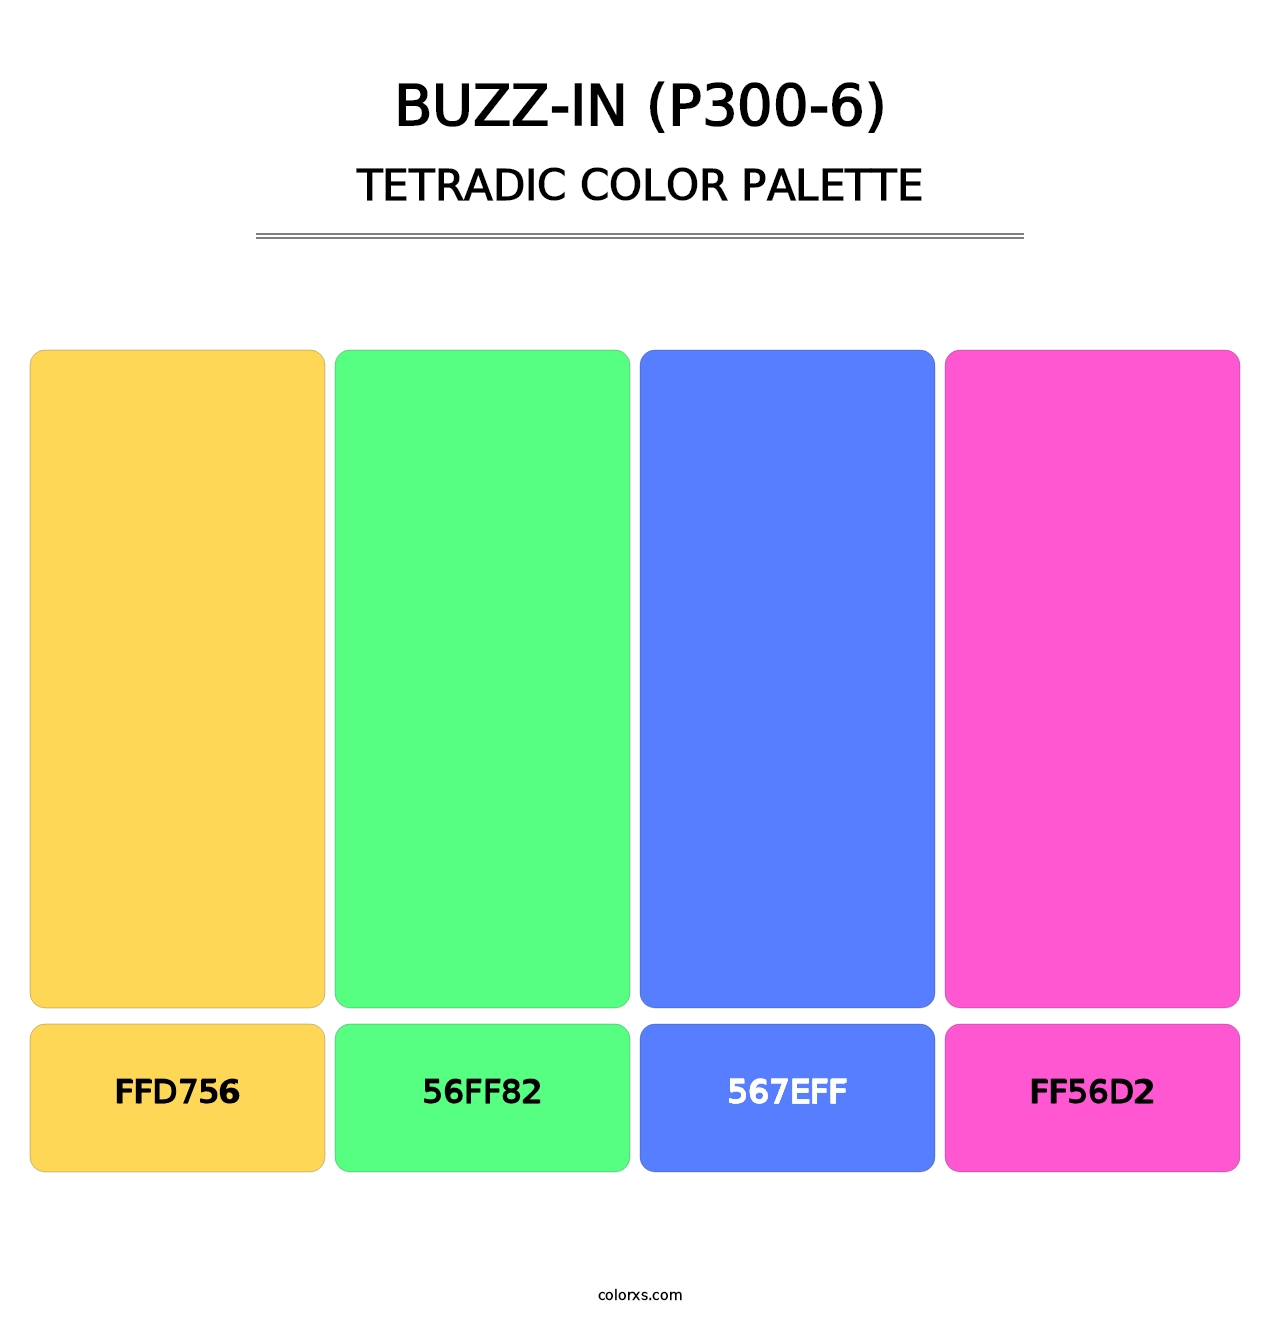 Buzz-In (P300-6) - Tetradic Color Palette